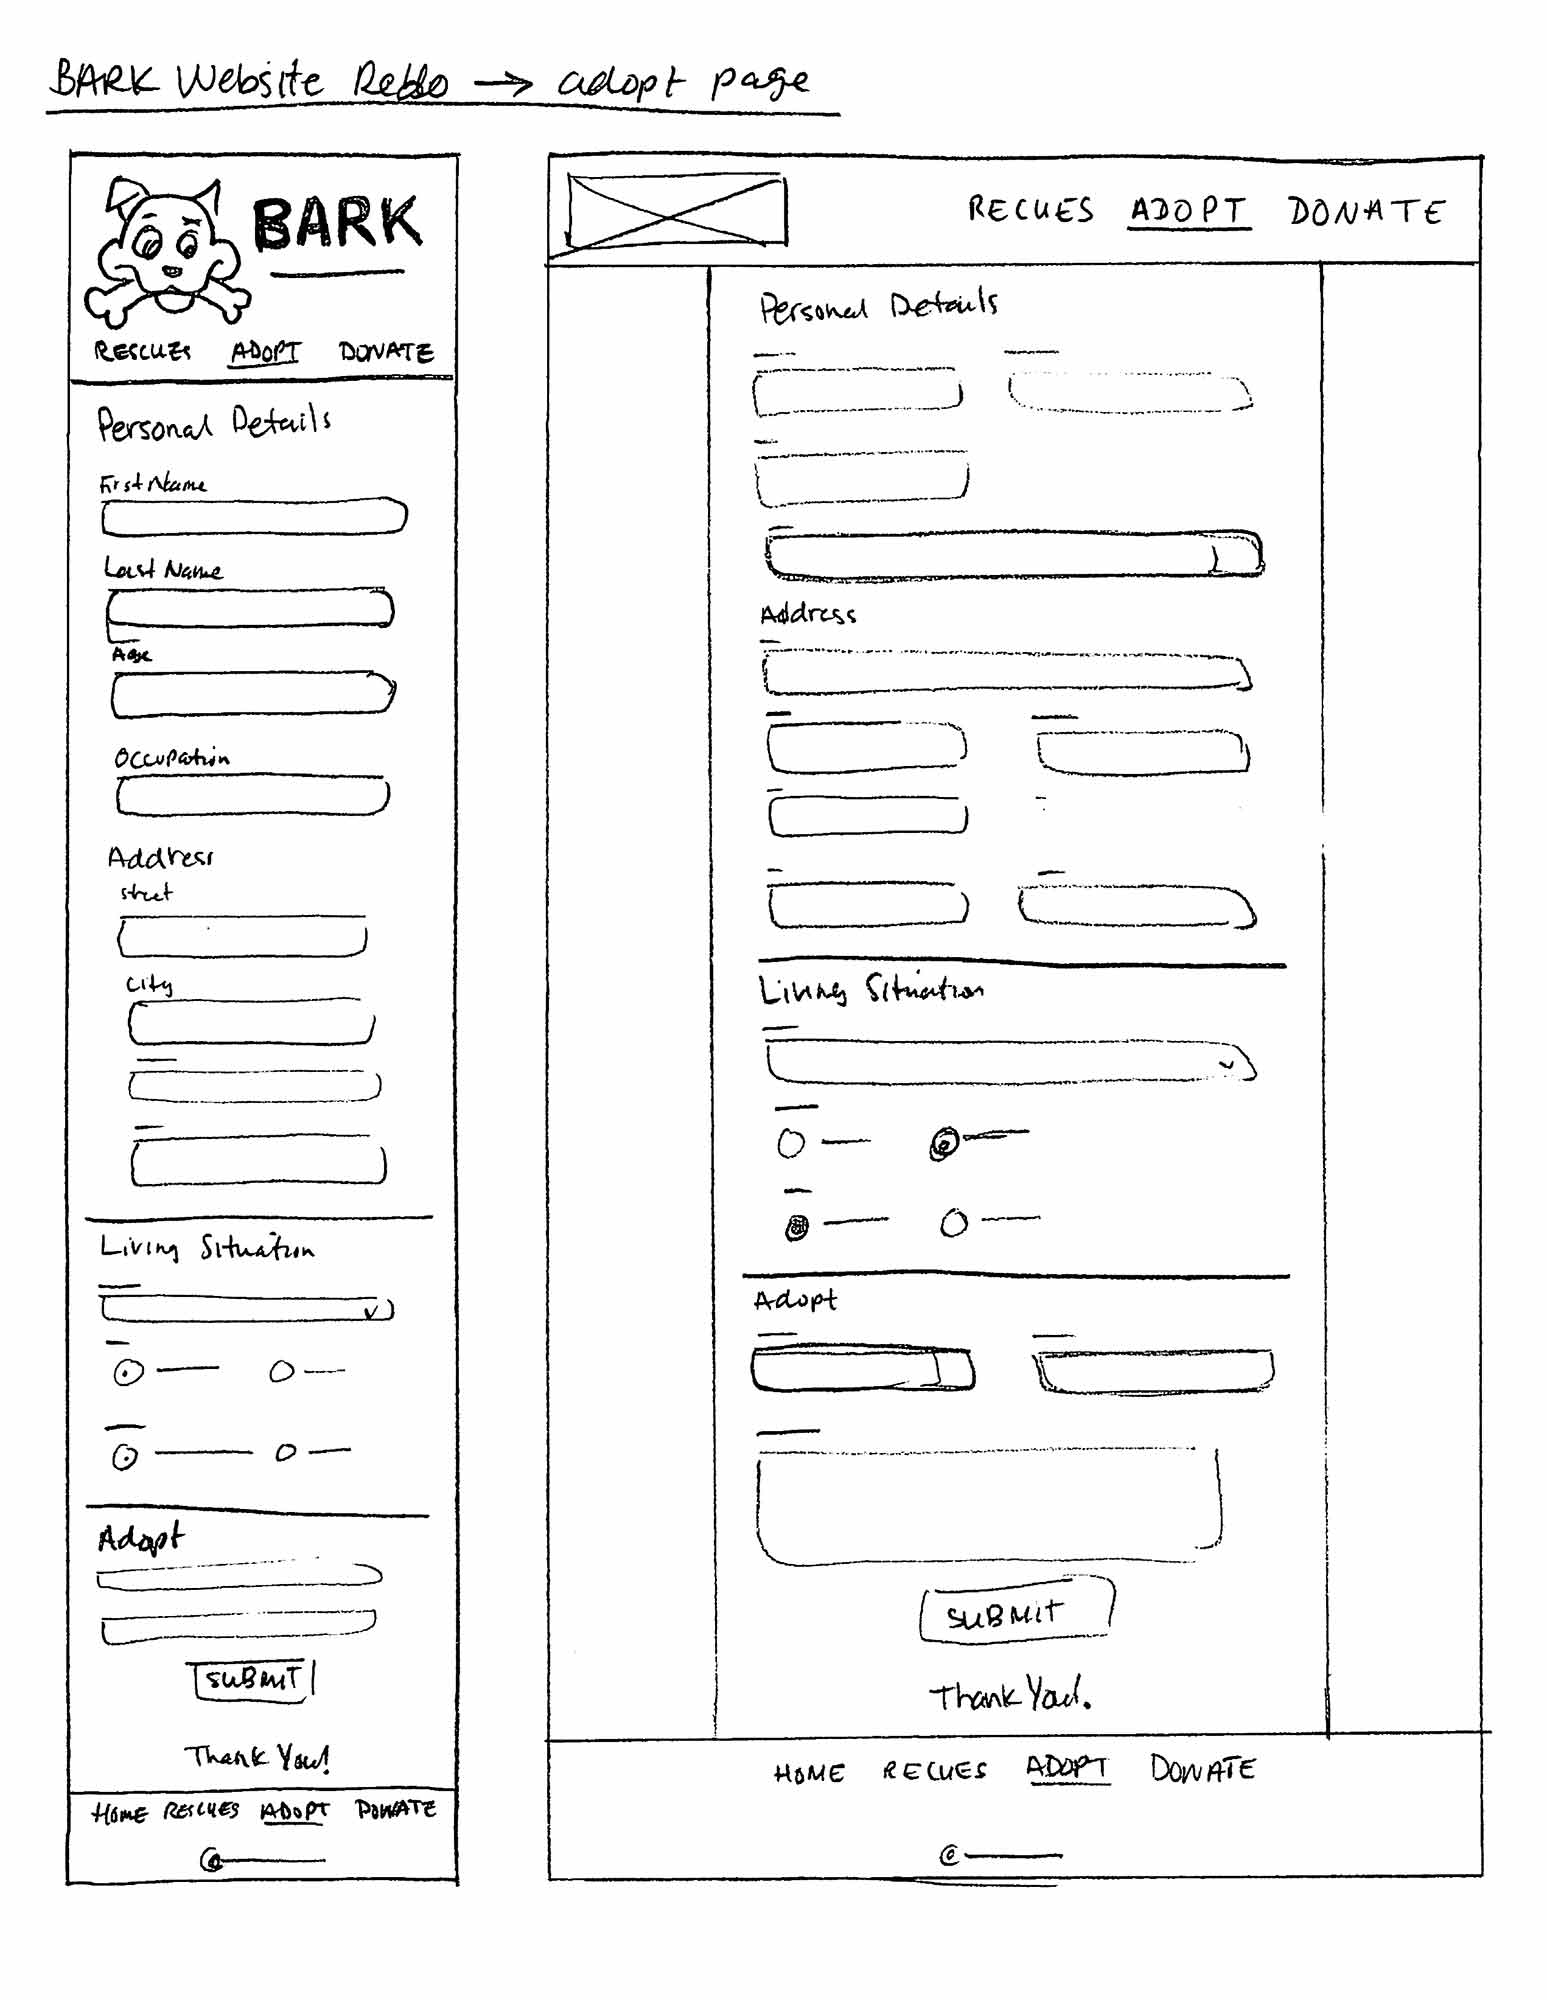 This is an image of the website wireframes. This is the layout for the adoption form page across different screen sizes.
